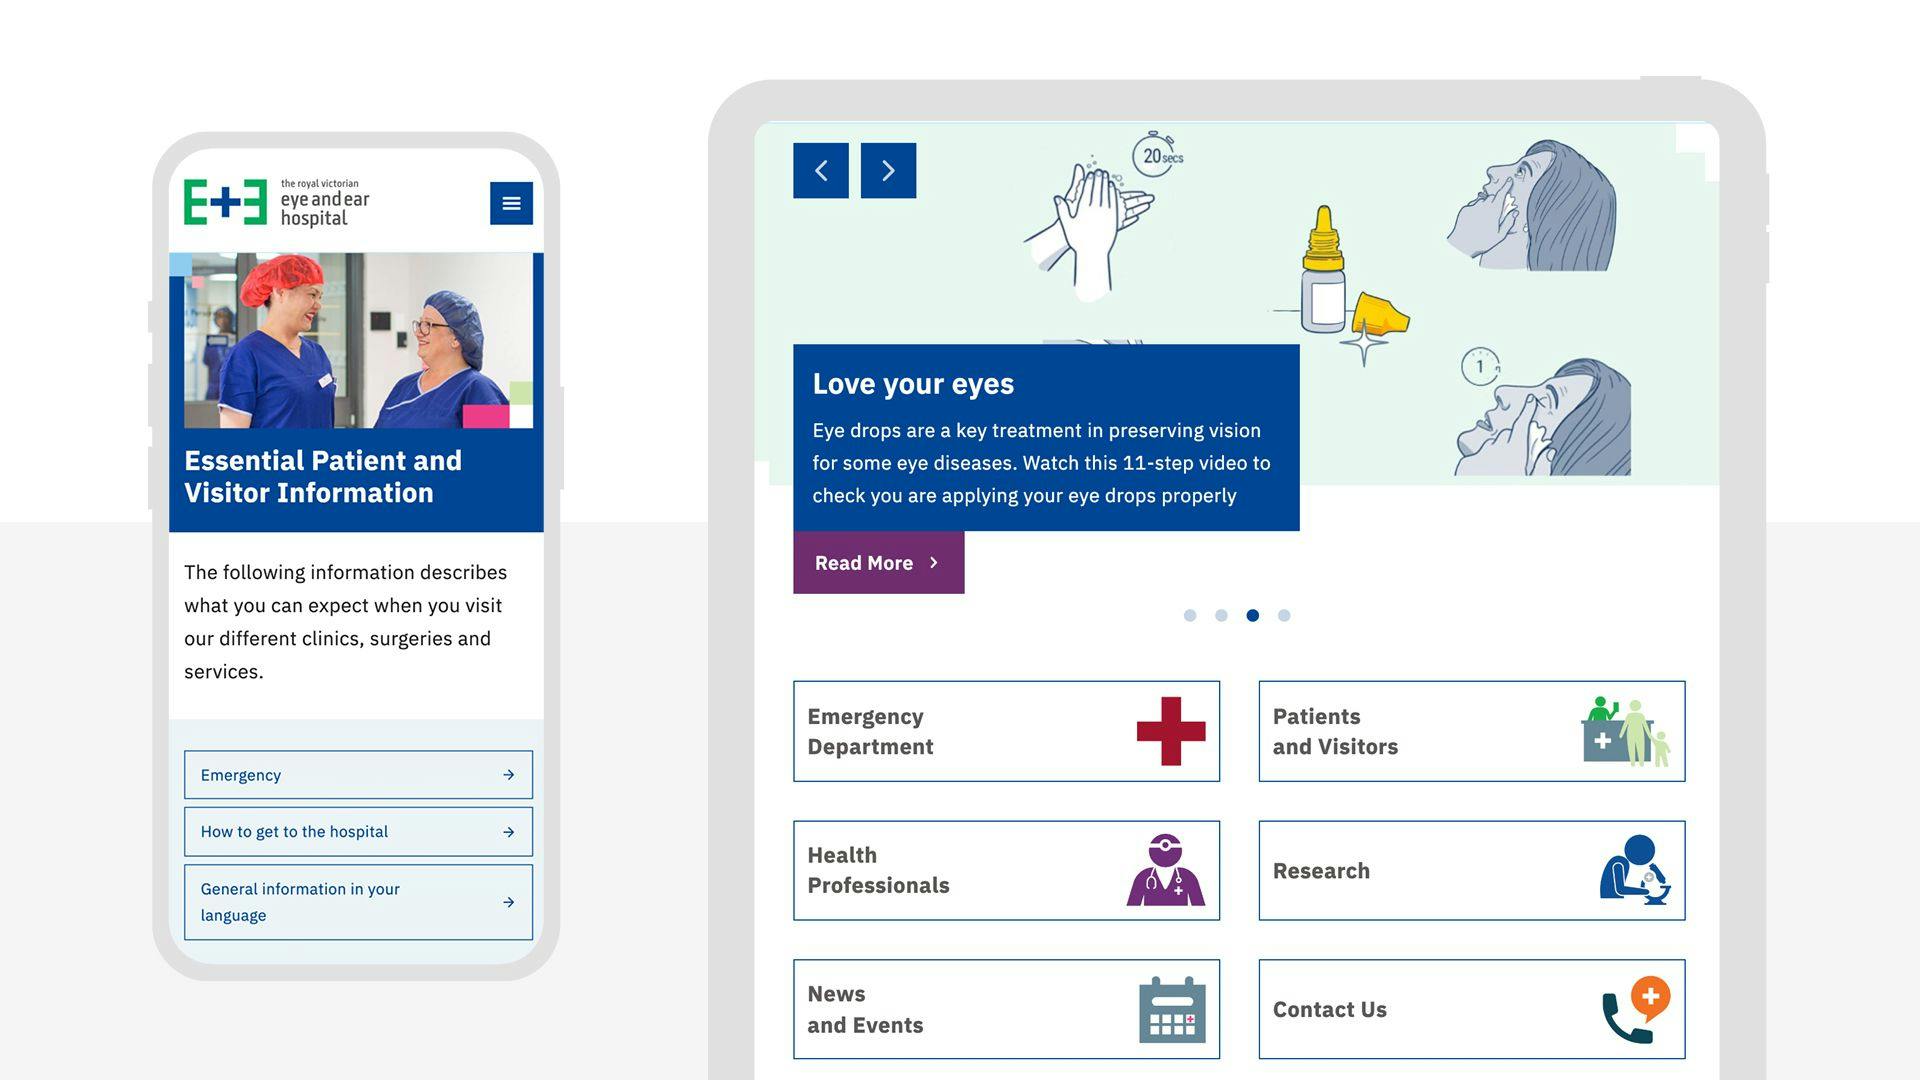 The home page and patient information pages